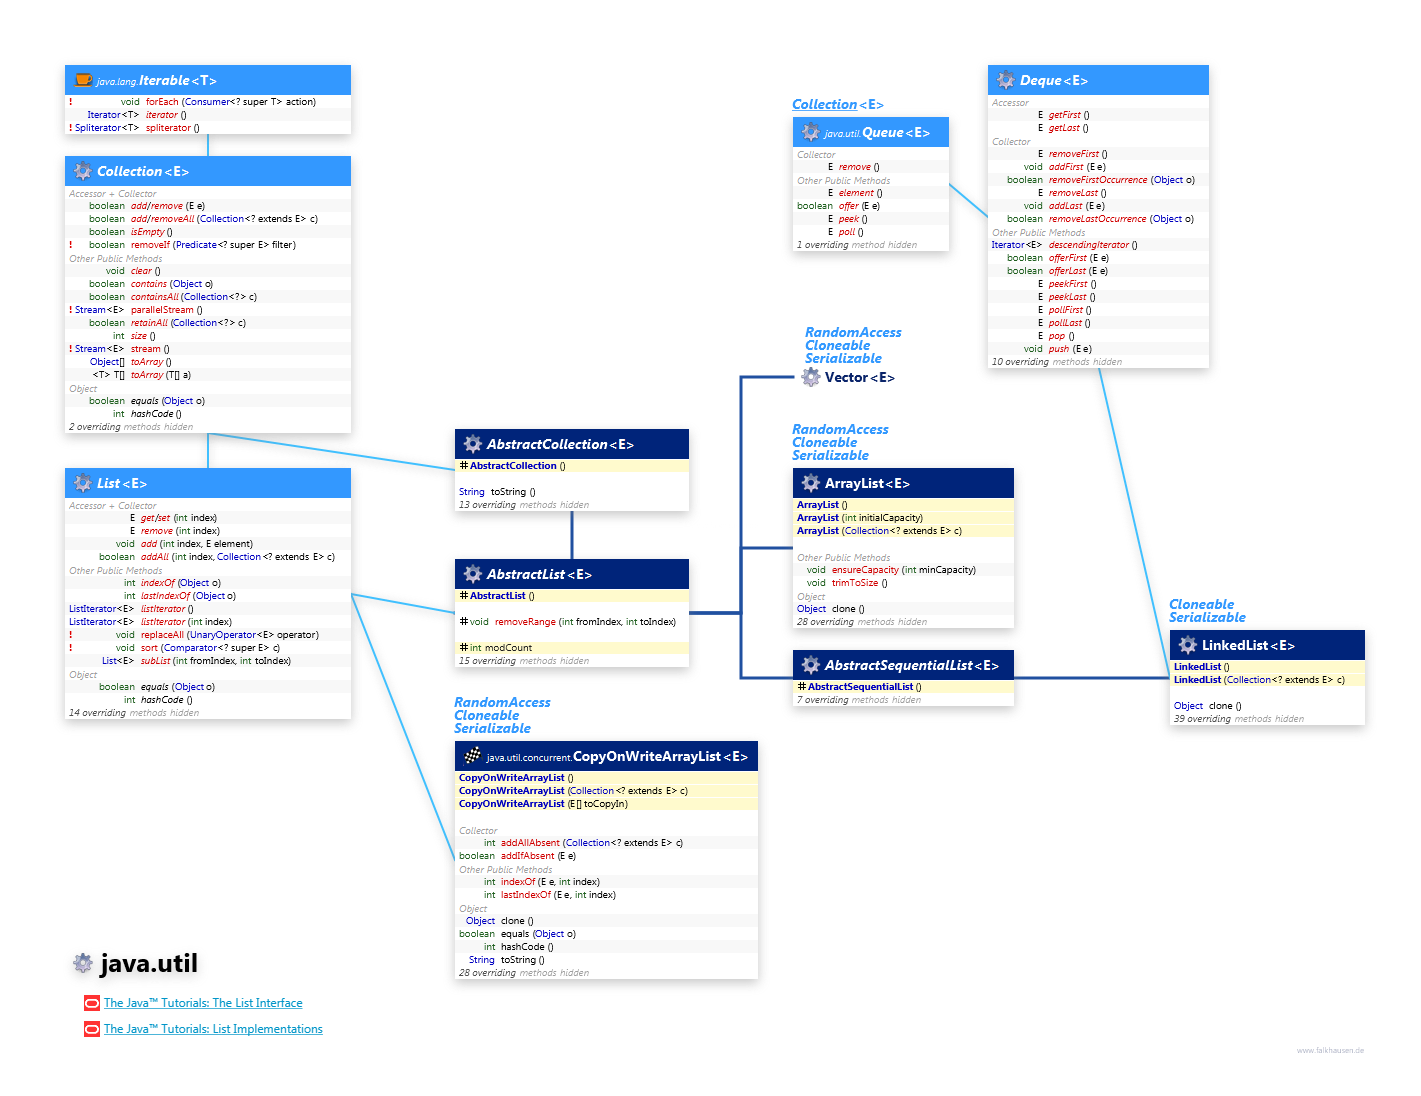 java.util Collection List class diagram and api documentation for Java 8